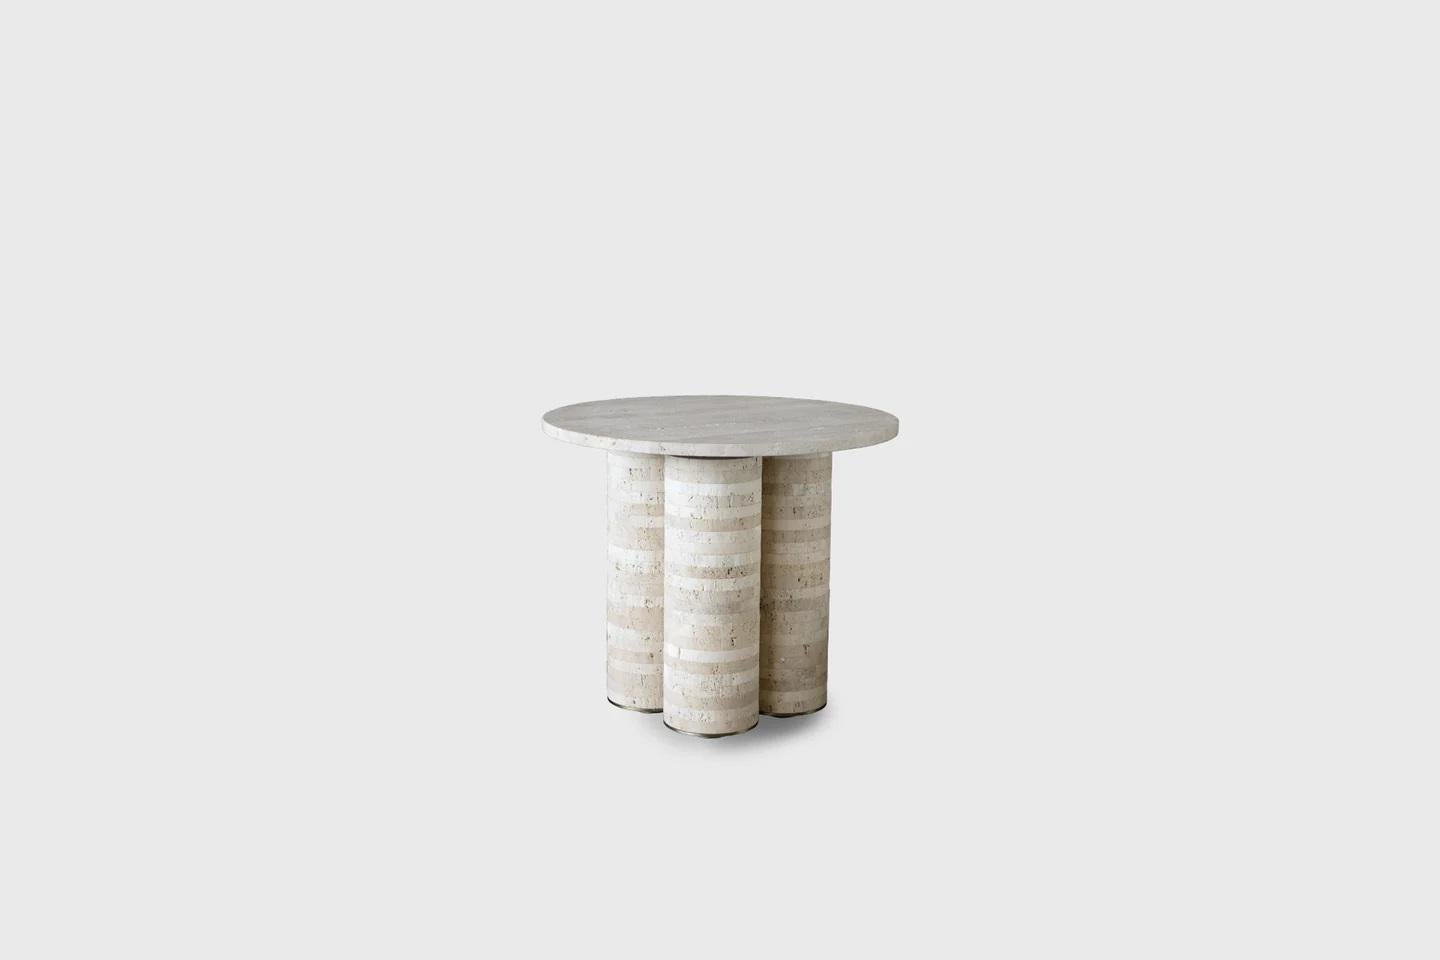 Travertine Navona Tall Trilith Side Table by Atra Design
Dimensions: D 50 x W 43 x H 52 cm.
Materials: Travertine Navona and brass.

Different marble options available: Verde Tikal, Negro Monterrey, Silver Travertine, Ocean Black Travertine, Verde